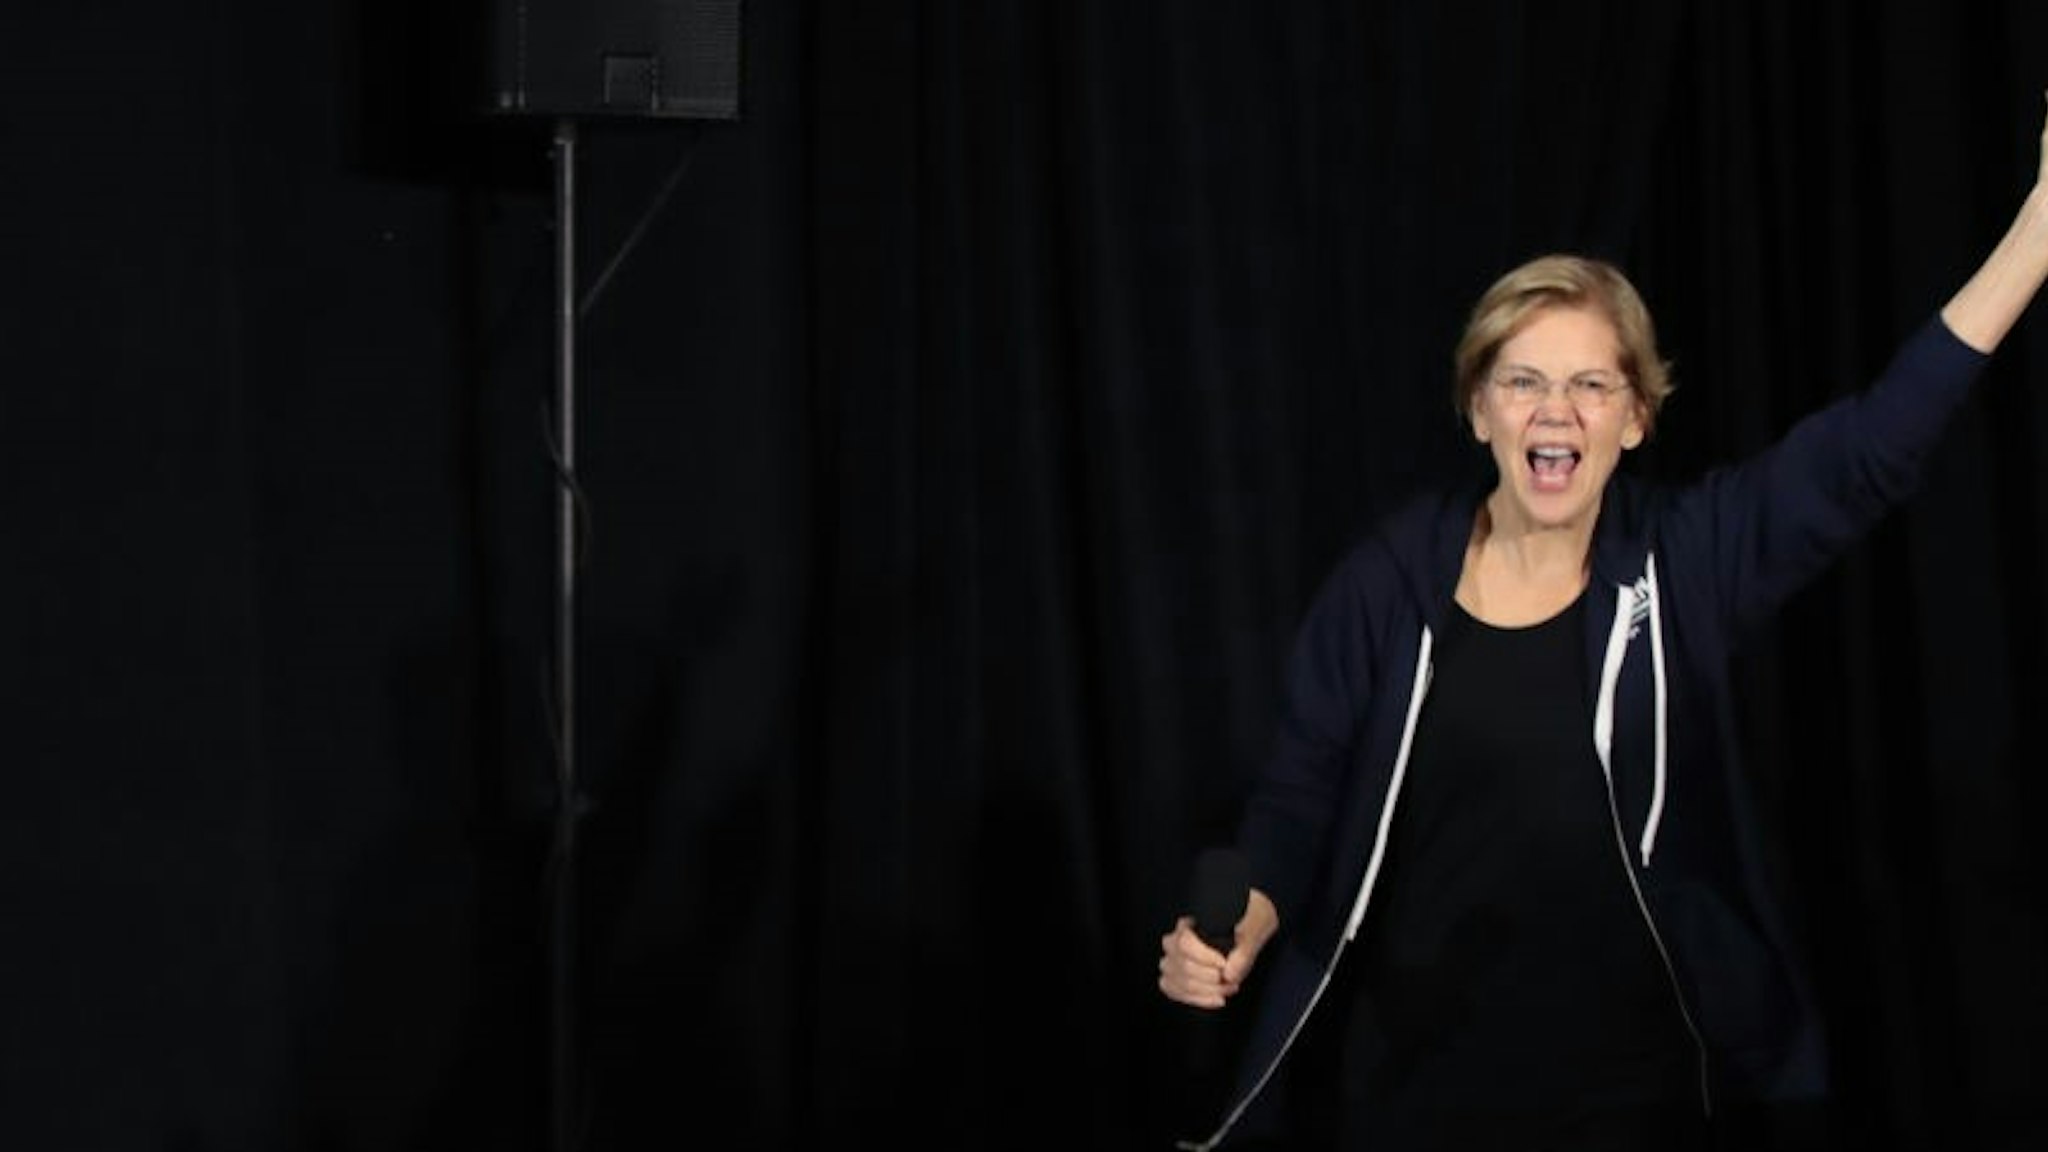 Democratic presidential candidate Sen. Elizabeth Warren (D-MA) speaks to guests during a campaign stop at the Val Air Ballroom on November 25, 2019 in West Des Moines, Iowa. The 2020 Iowa Democratic caucuses will take place on February 3, 2020, making it the first nominating contest for the Democratic Party in choosing their presidential candidate.